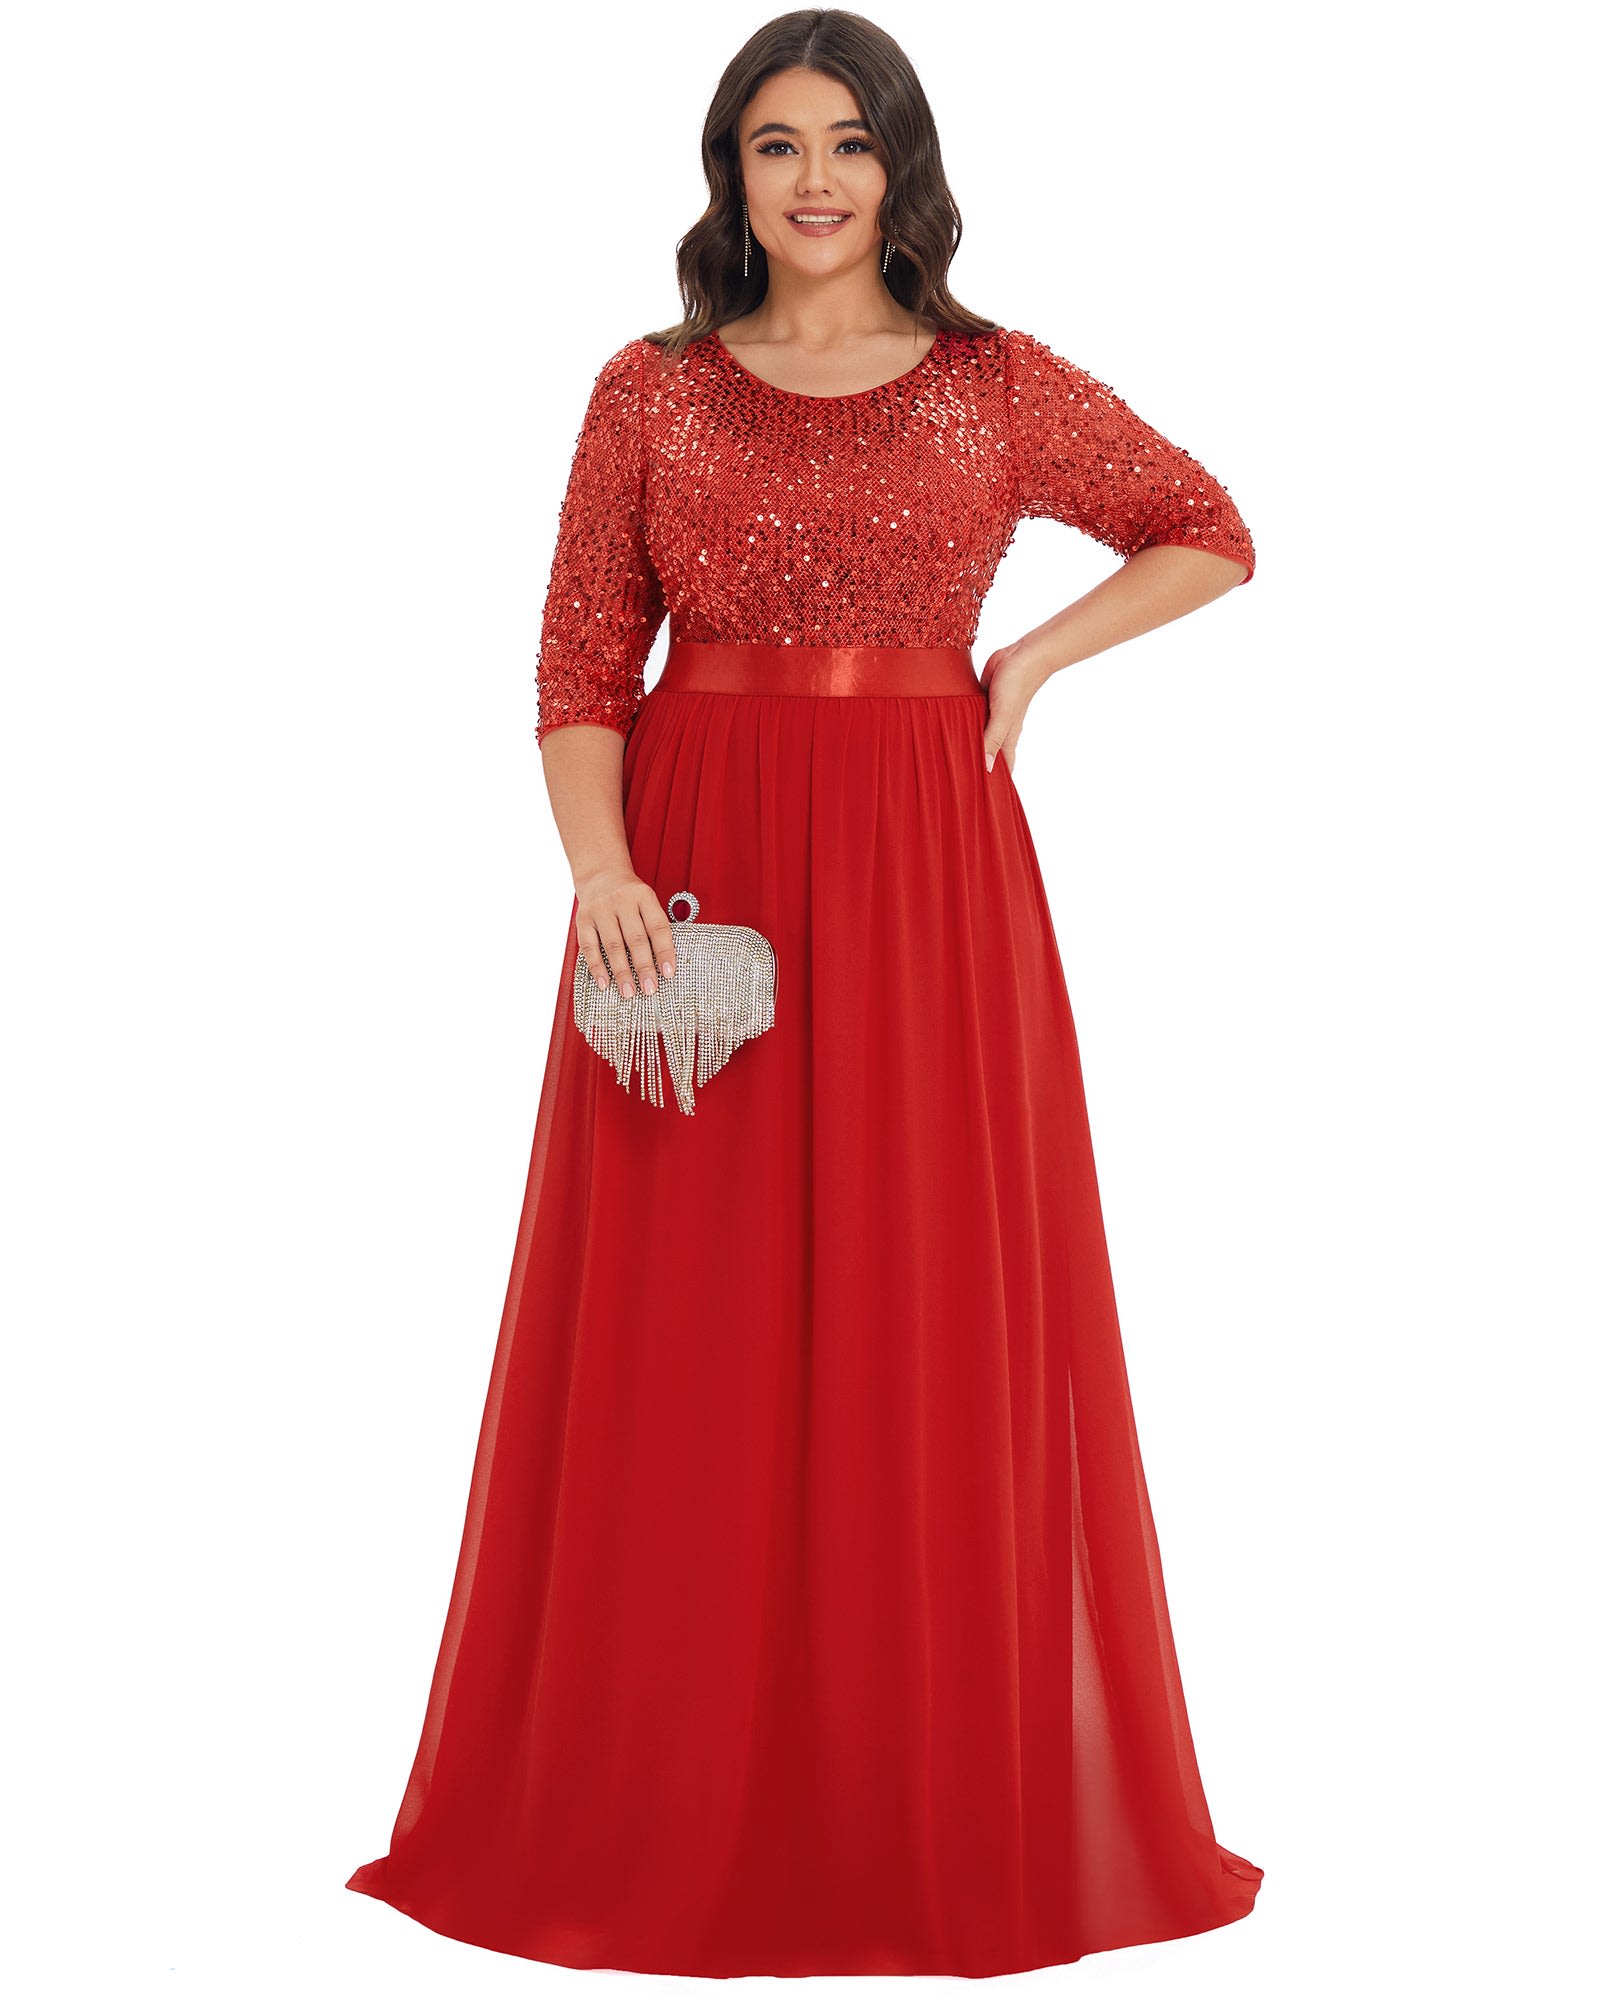 3/4 Sleeves Round Neck Evening Dress With Sequin Bodice | Red